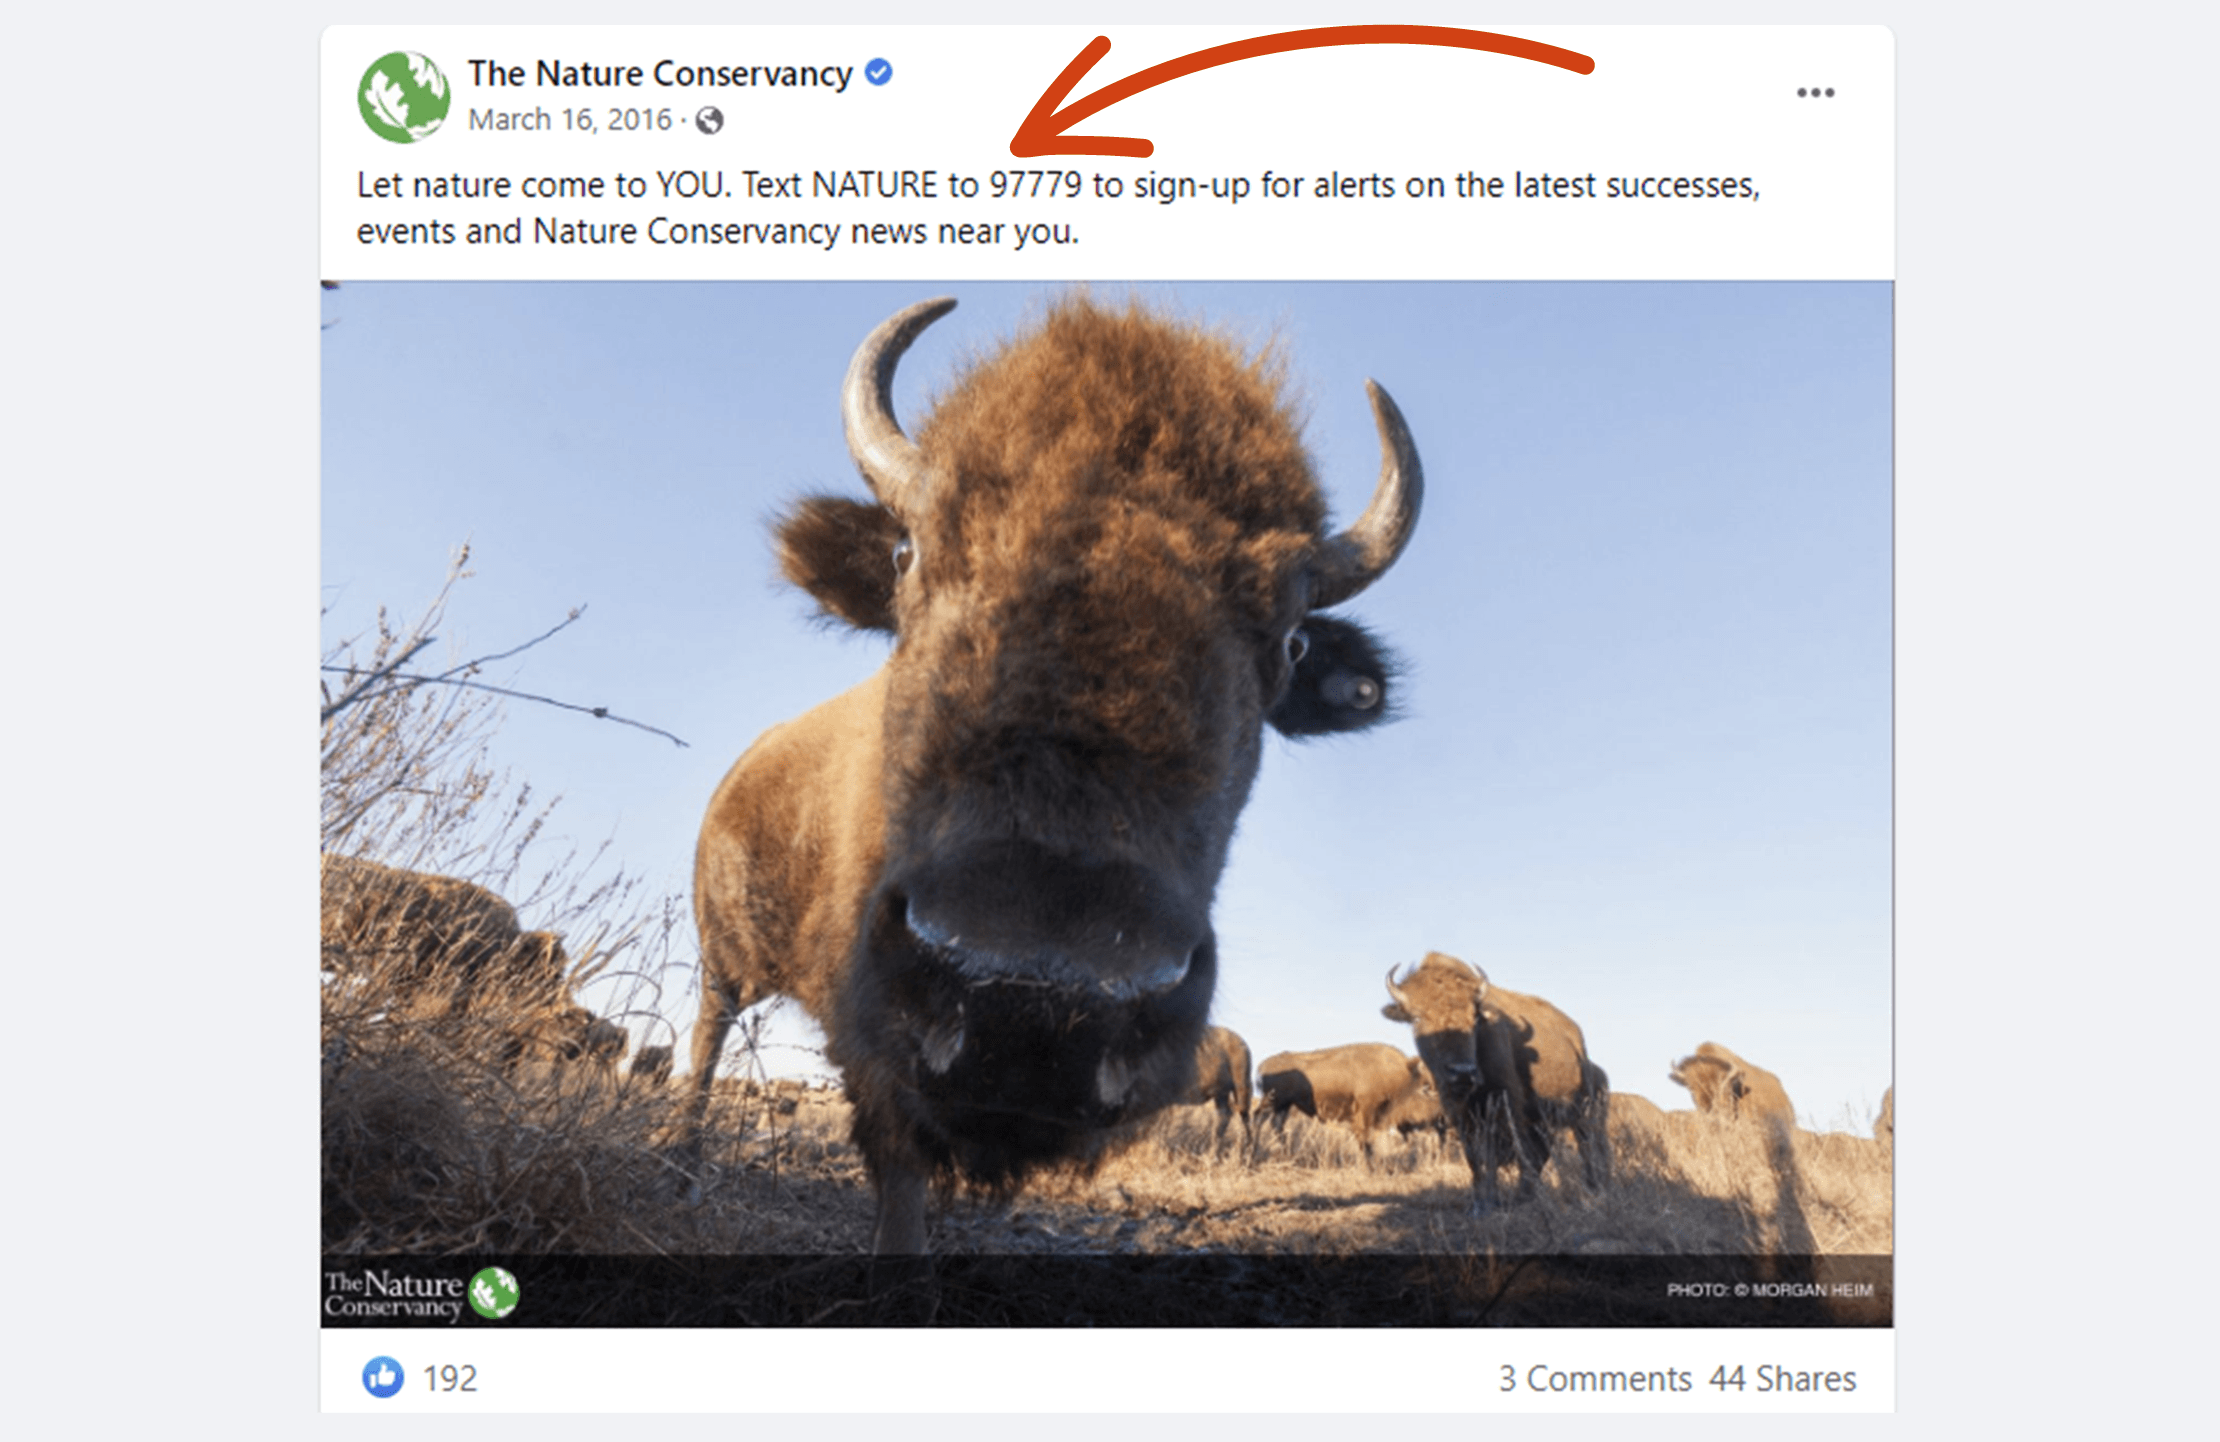 Example from The Nature Conservancy’s Facebook page